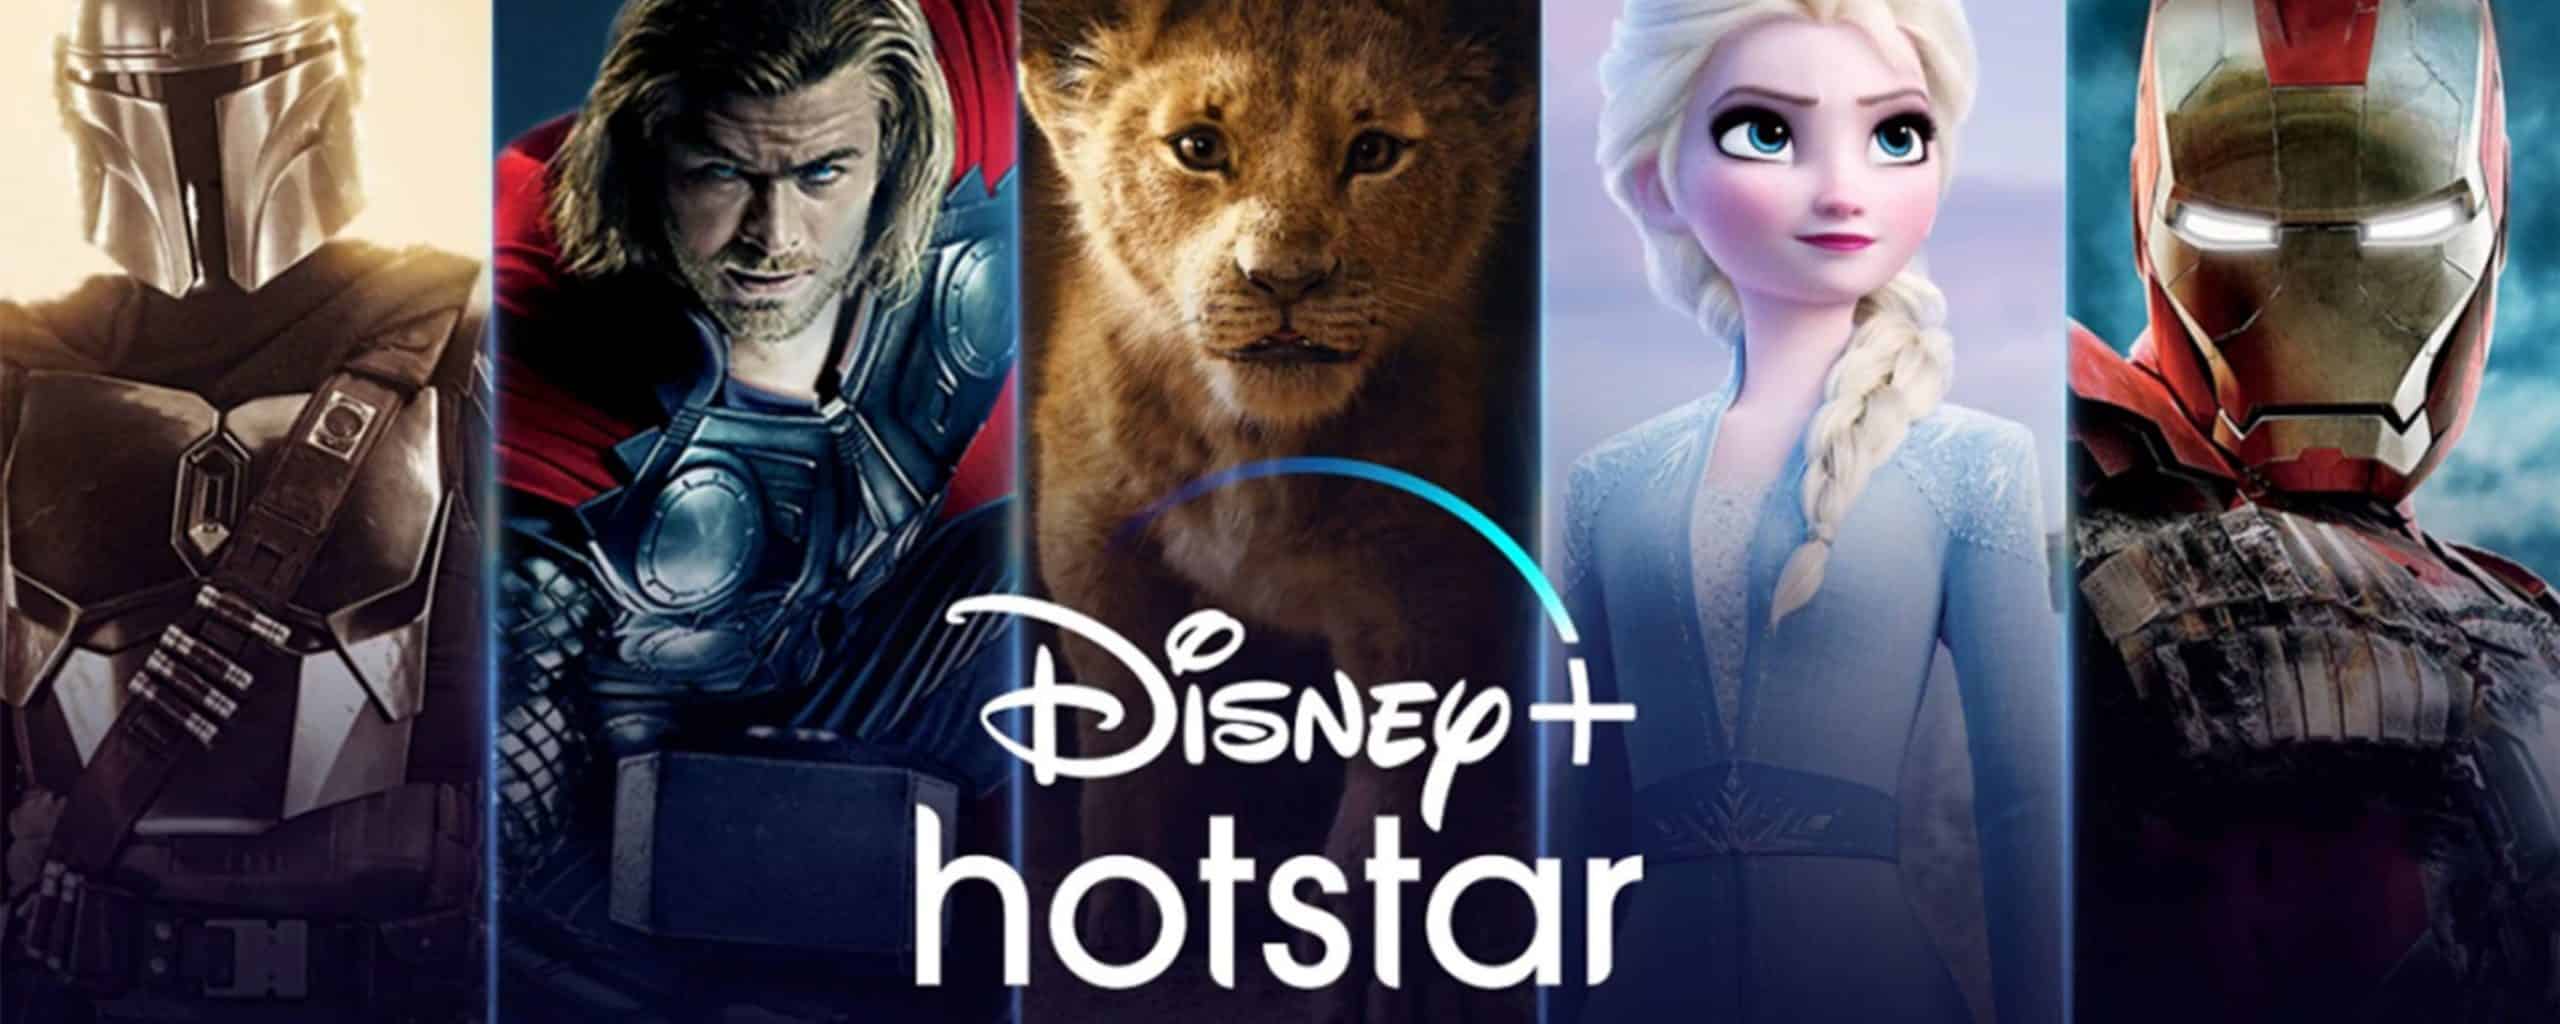 Disney Hotstar Coming Soon To Indonesia What S On Disney Plus